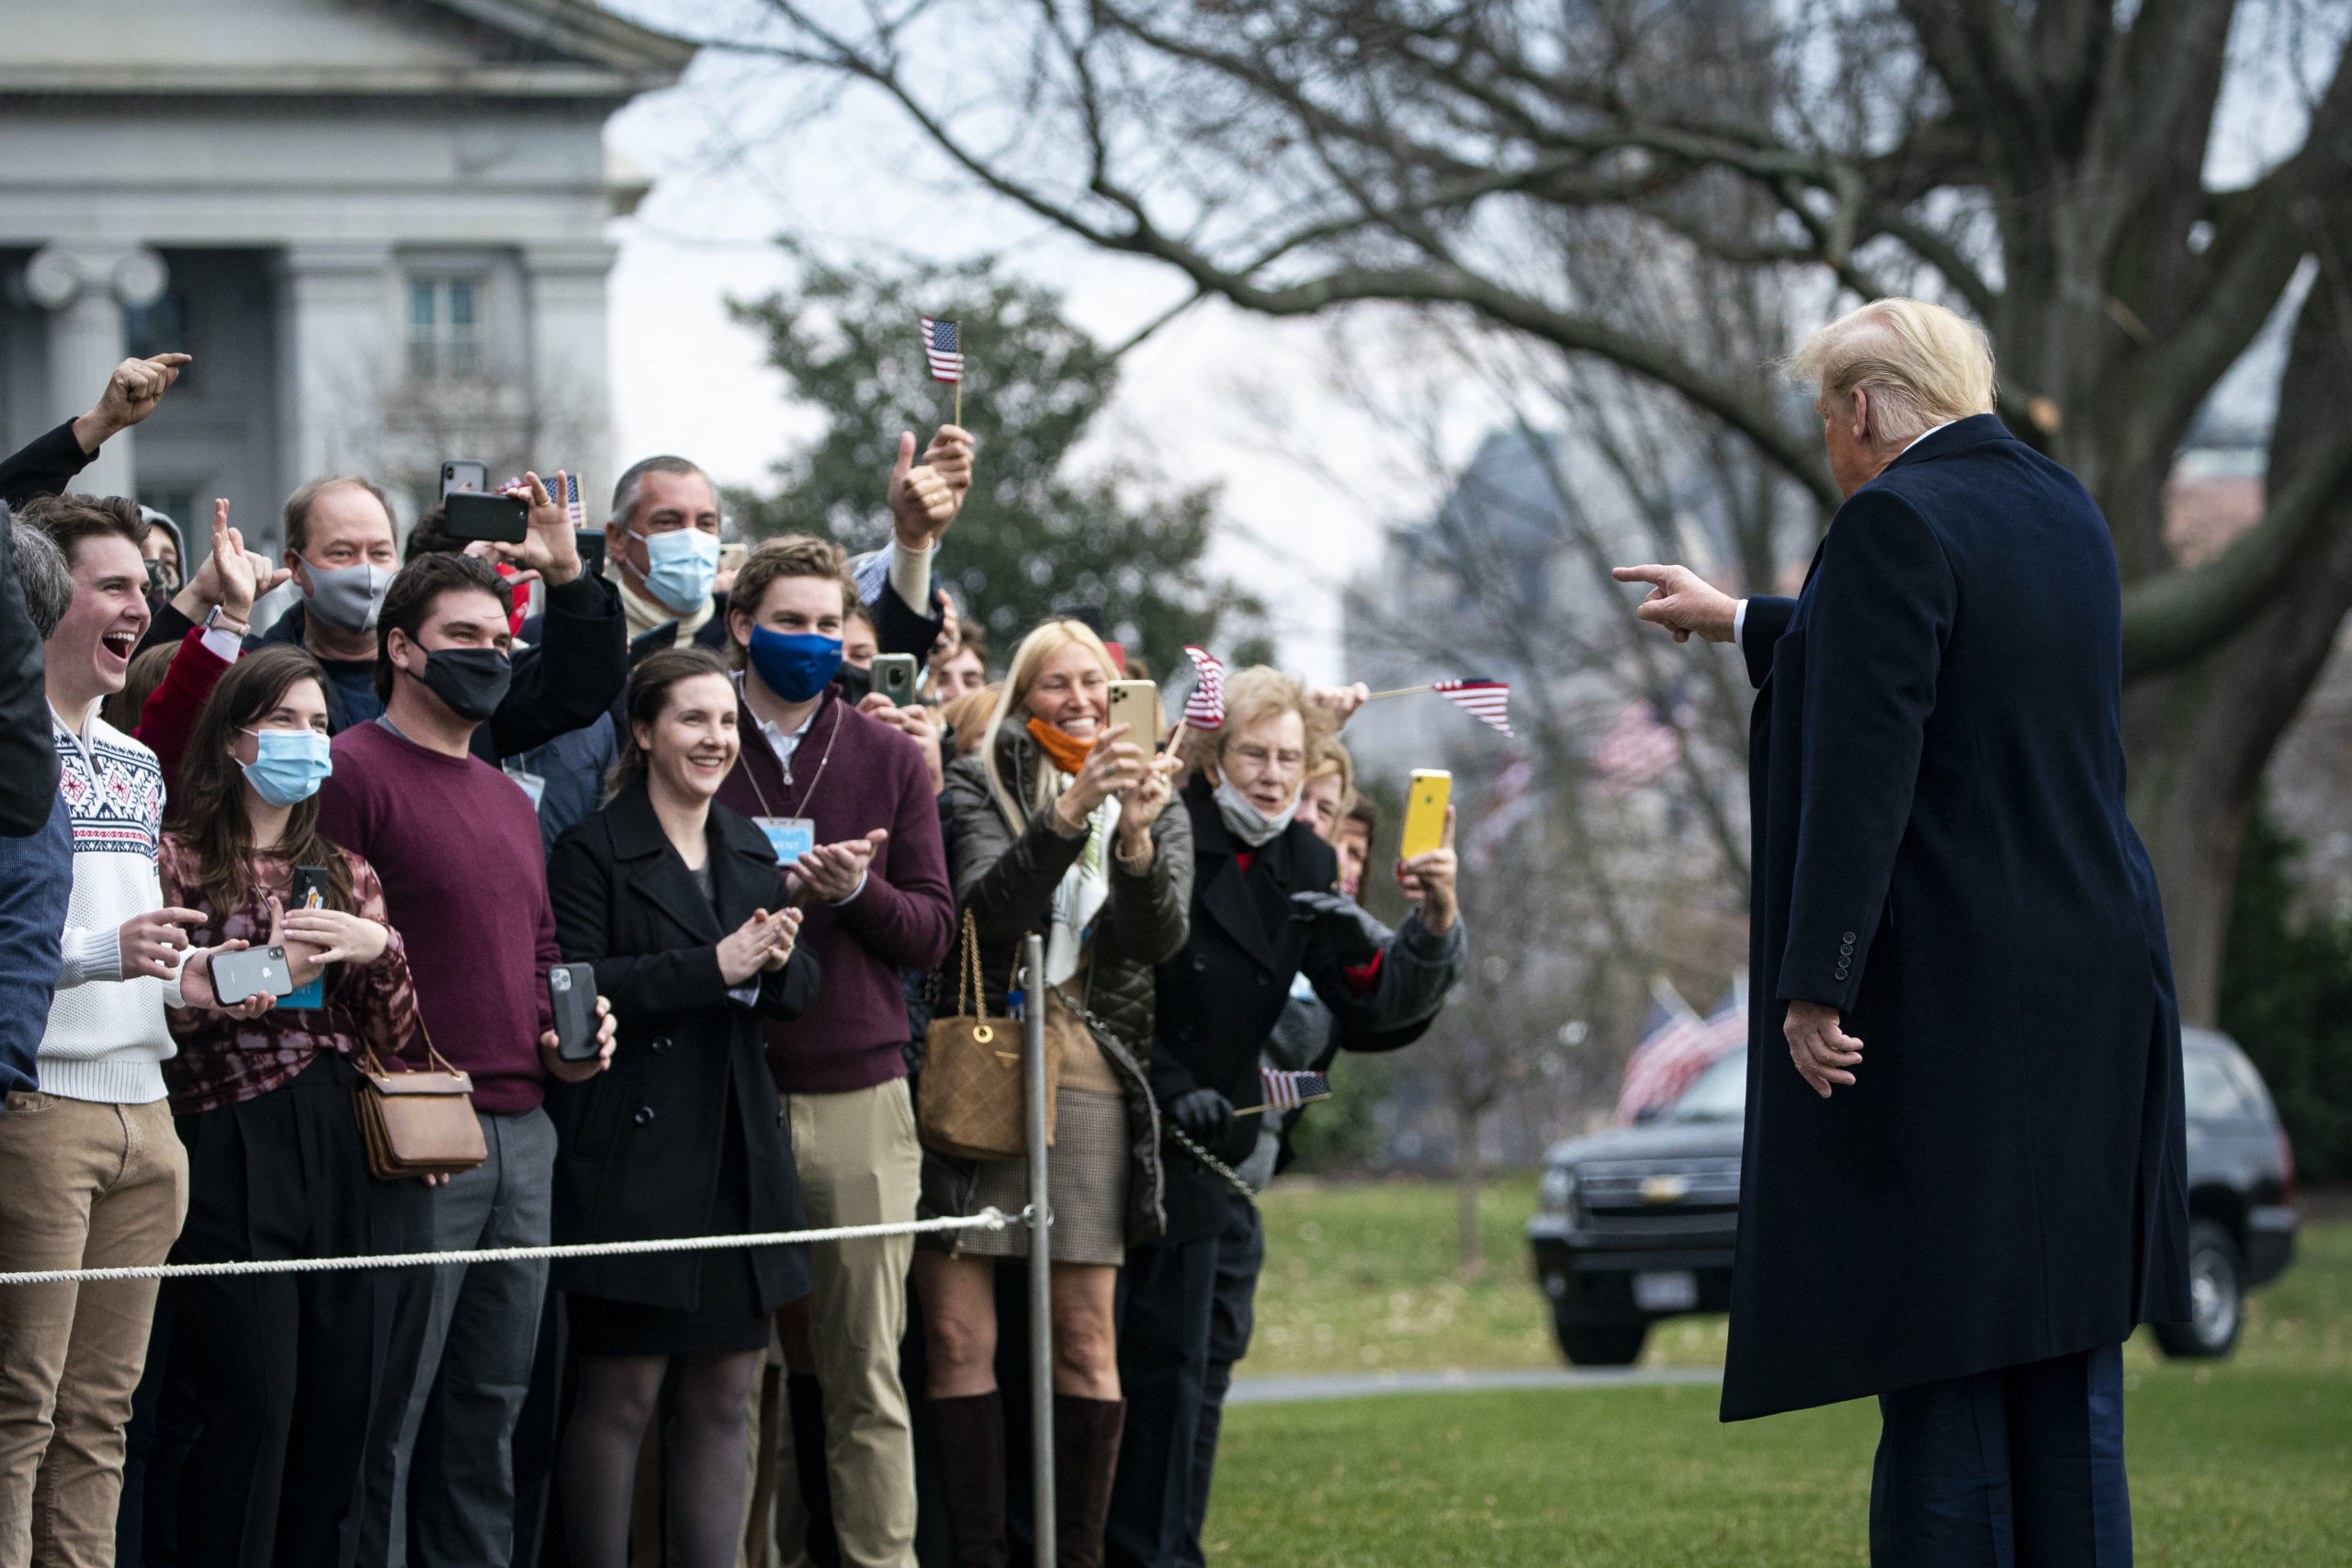 WASHINGTON, DC - DECEMBER 12: U.S. President Donald Trump greets visitors as he departs on the South Lawn of the White House, on December 12, 2020 in Washington, DC. Trump is traveling to the Army versus Navy Football Game at the United States Military Academy in West Point, NY. (Photo by Al Drago/Getty Images)